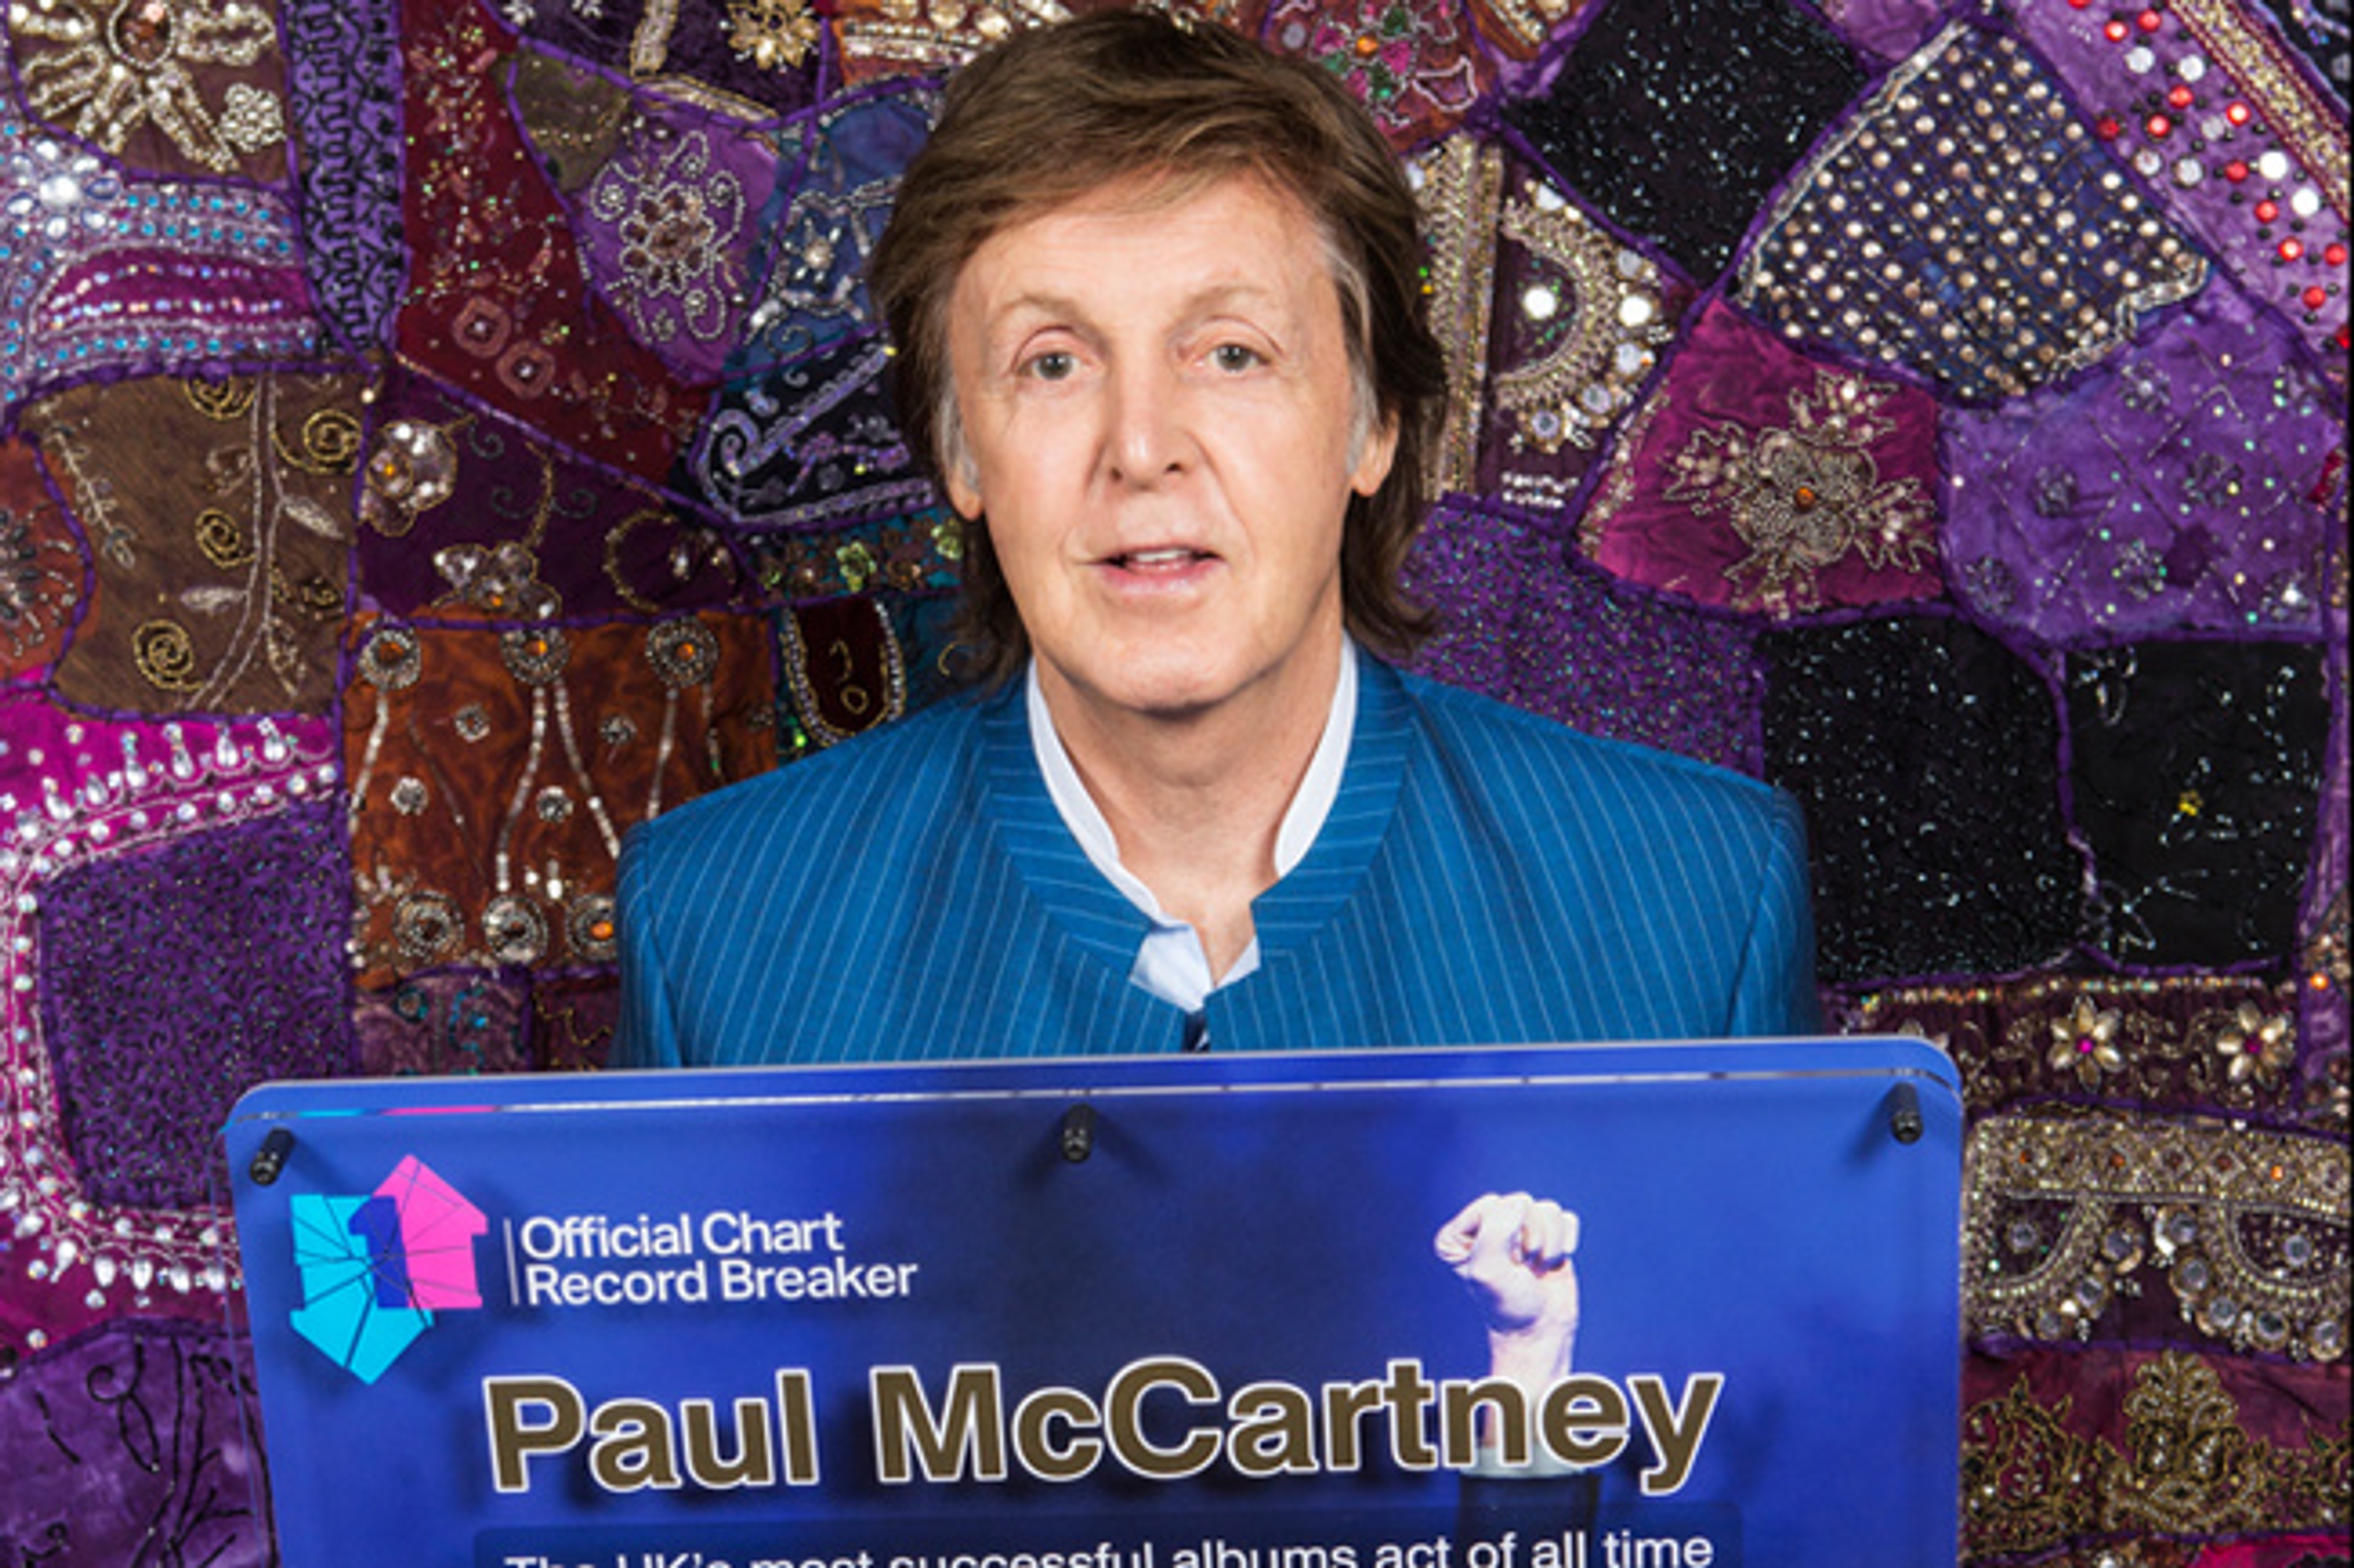 Paul named the UK’s most successful albums act of all time